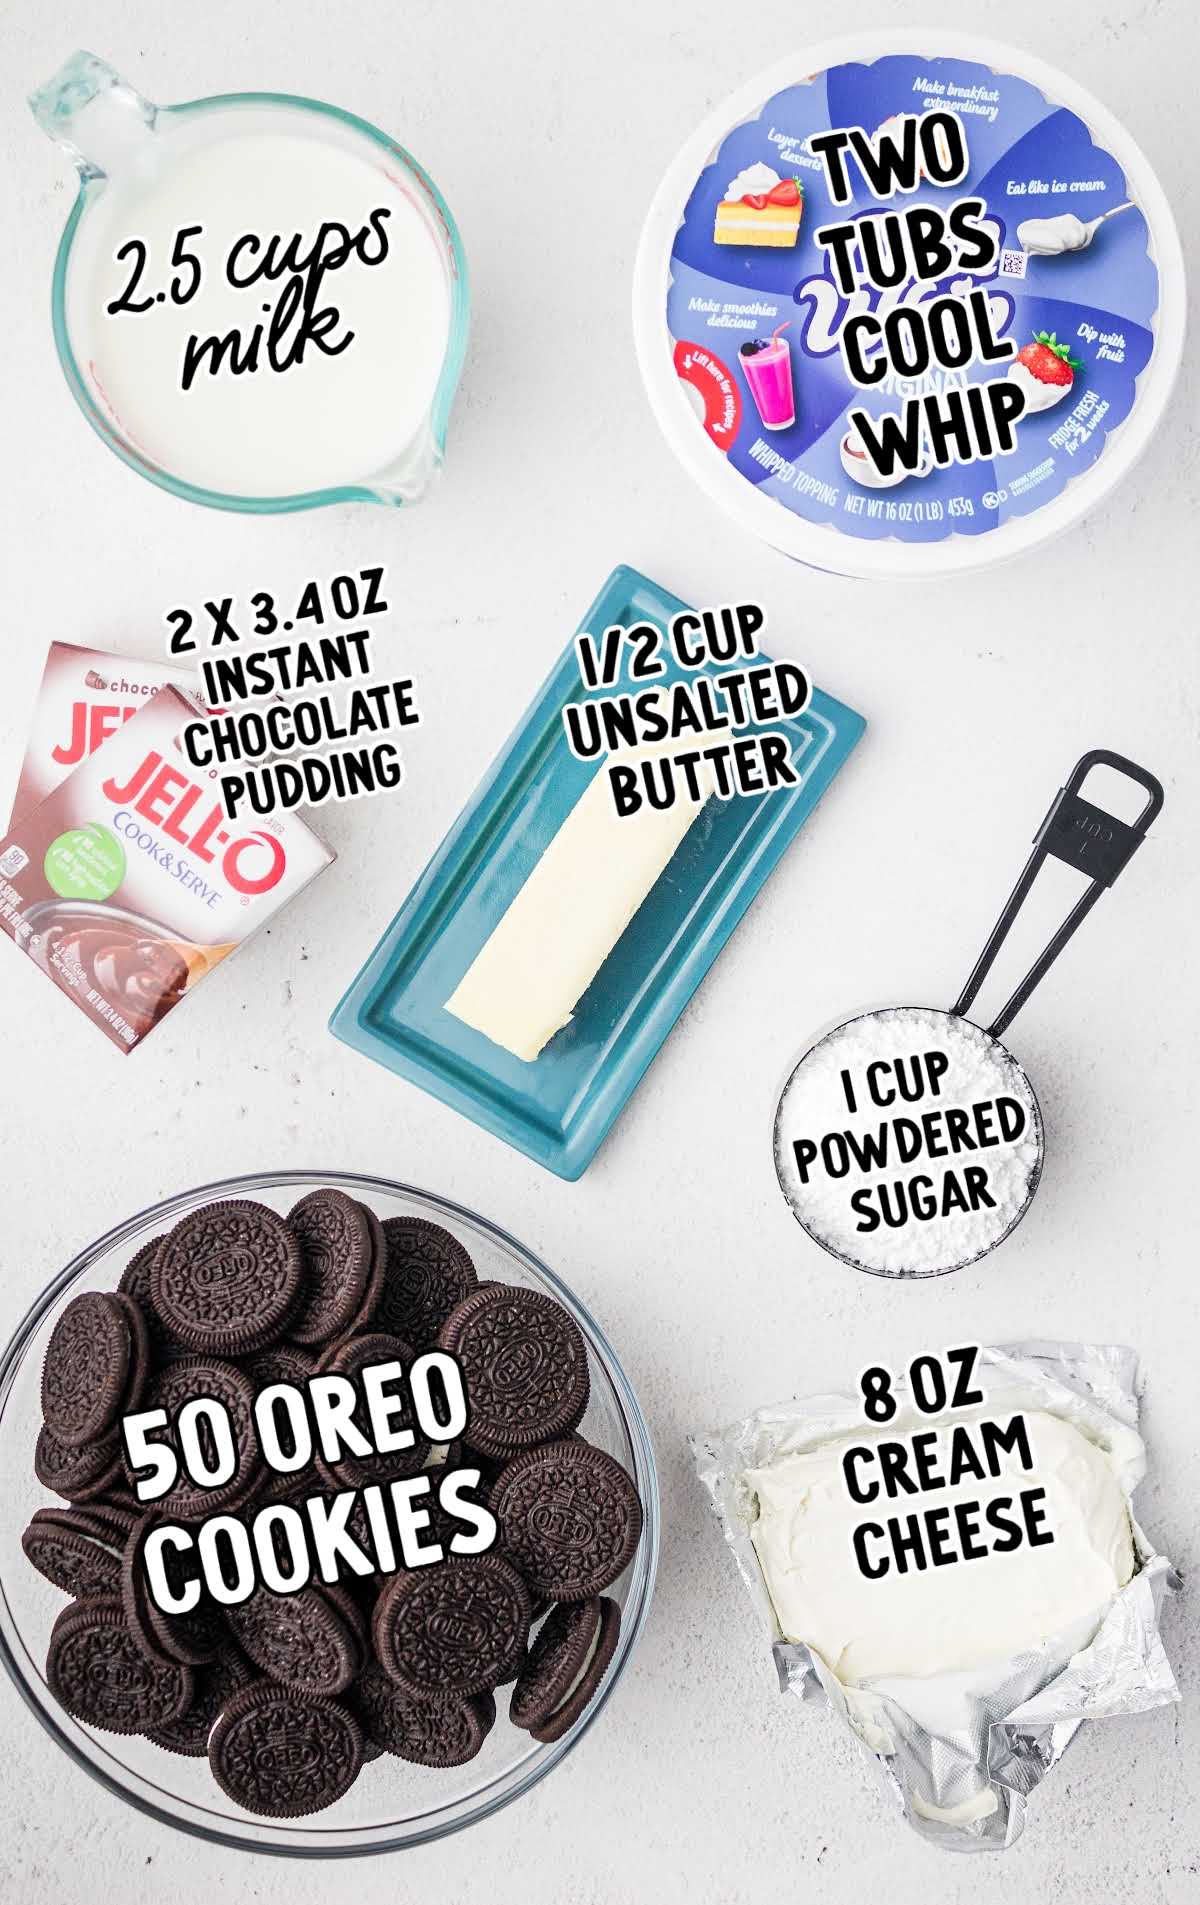 Oreo delight raw ingredients that are labeled